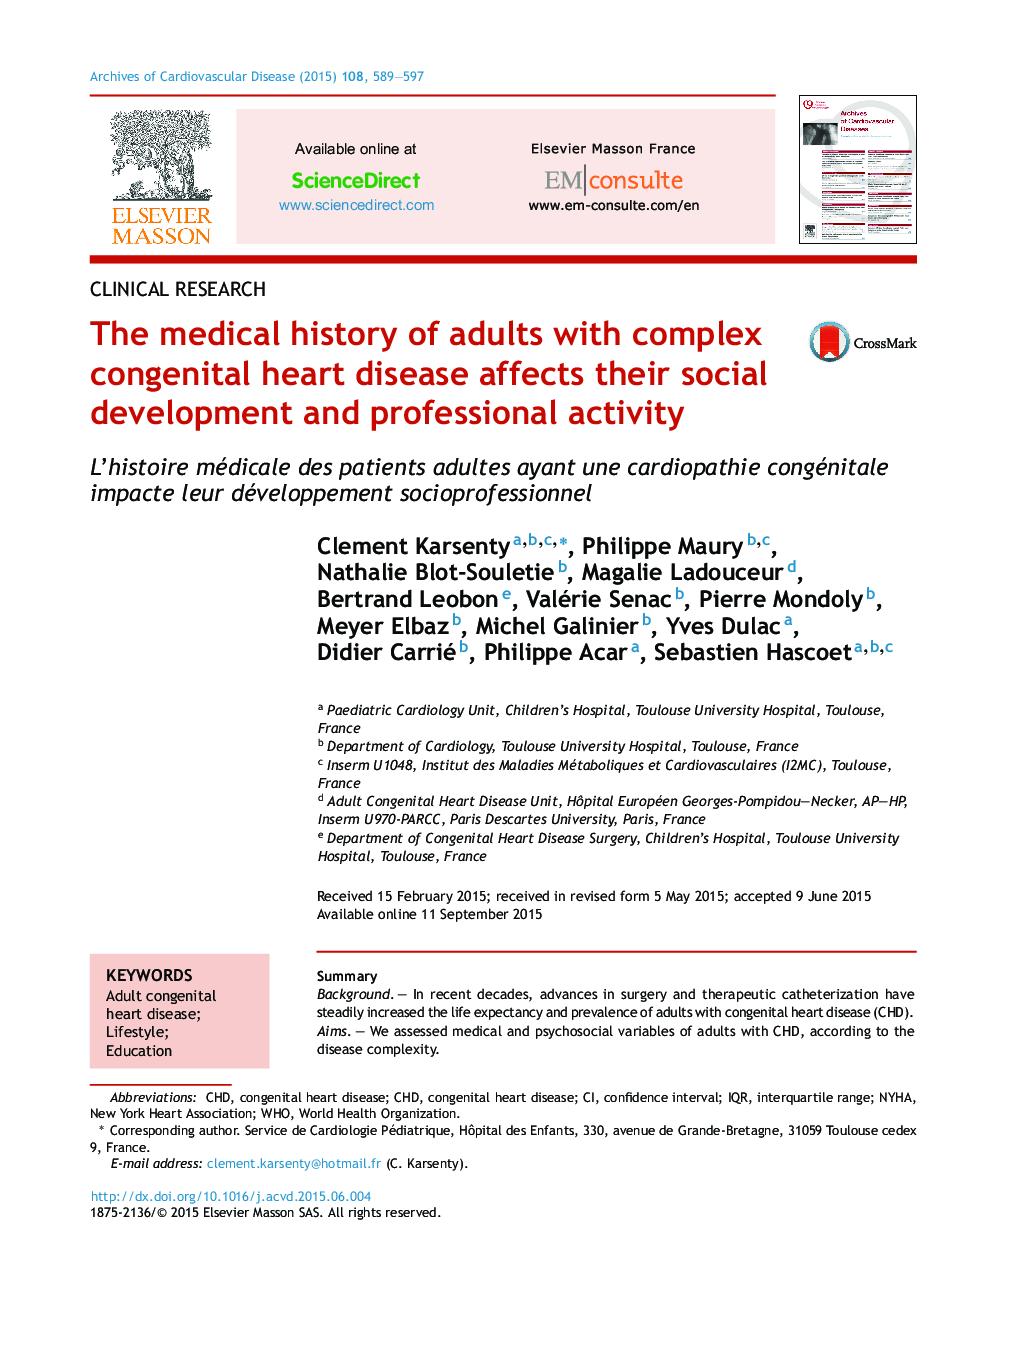 The medical history of adults with complex congenital heart disease affects their social development and professional activity